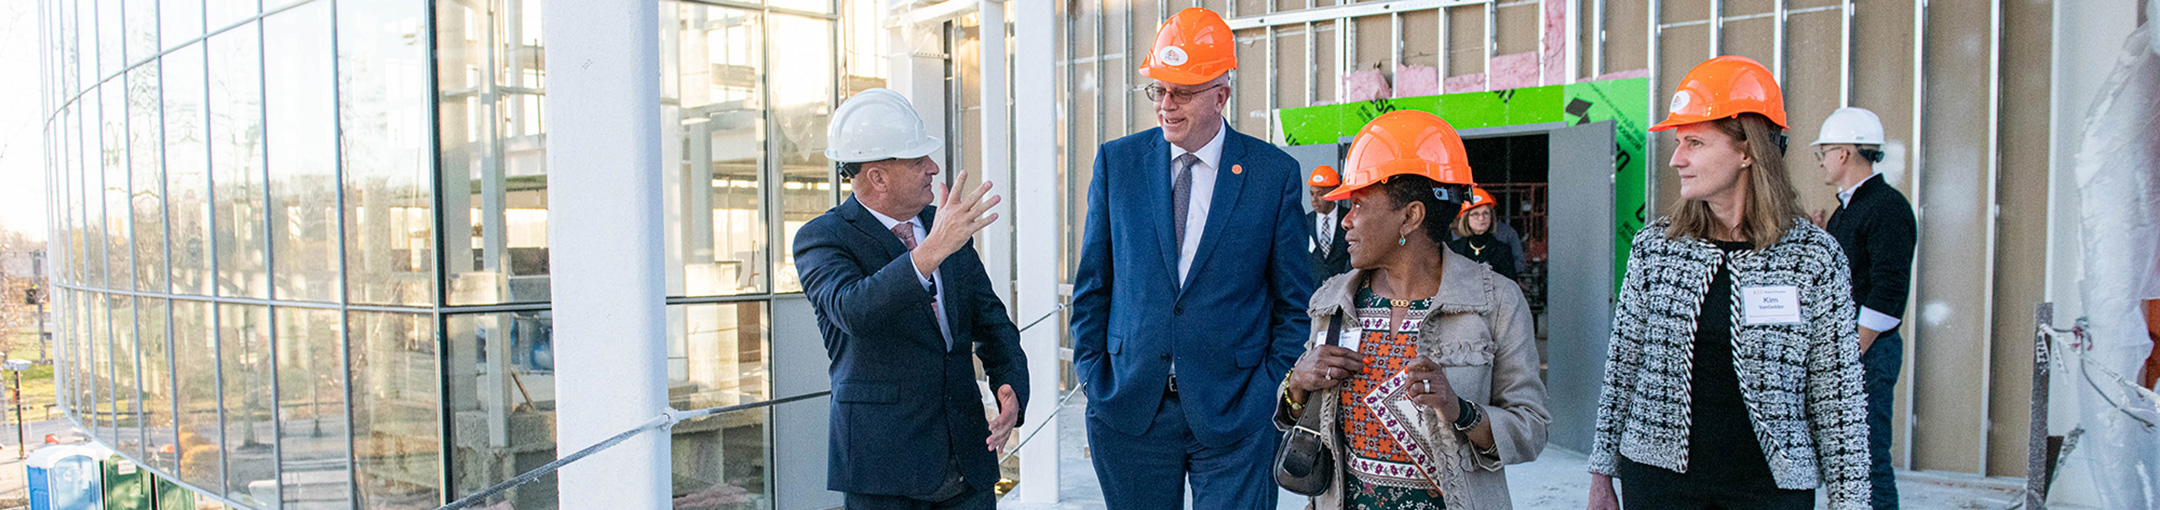 President Munson and others touring a construction project on campus.